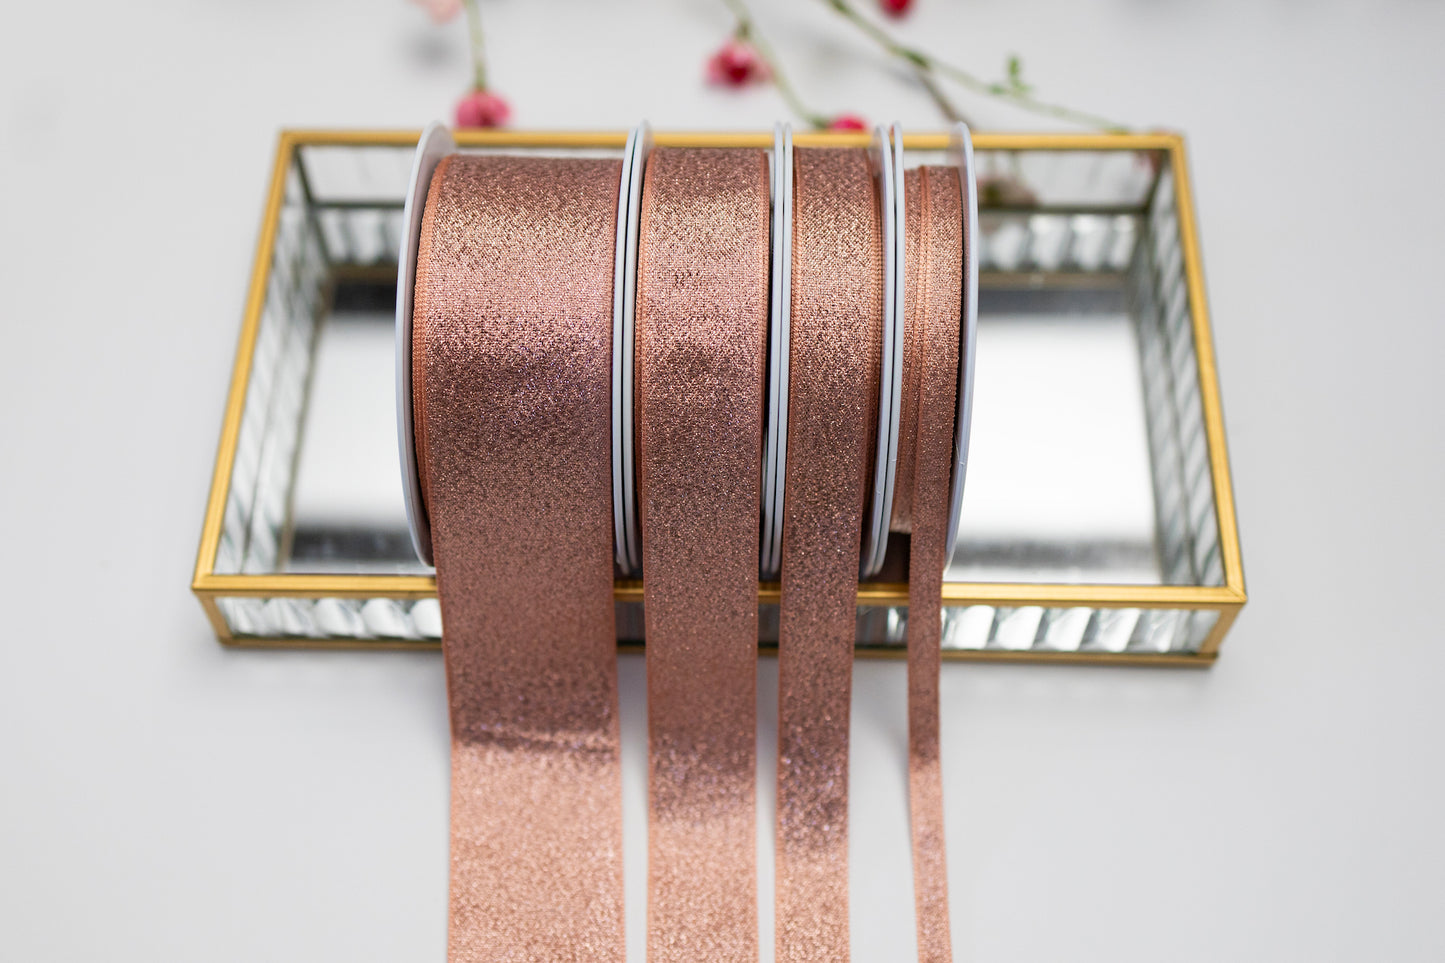 Metallic Sparkling Glitter Lame Ribbon By Berisfords, 5 Widths 3,7, 15, 25, 40mm, 1m Lengths, Perfect for Christmas, Weddings, Gift Wrapping